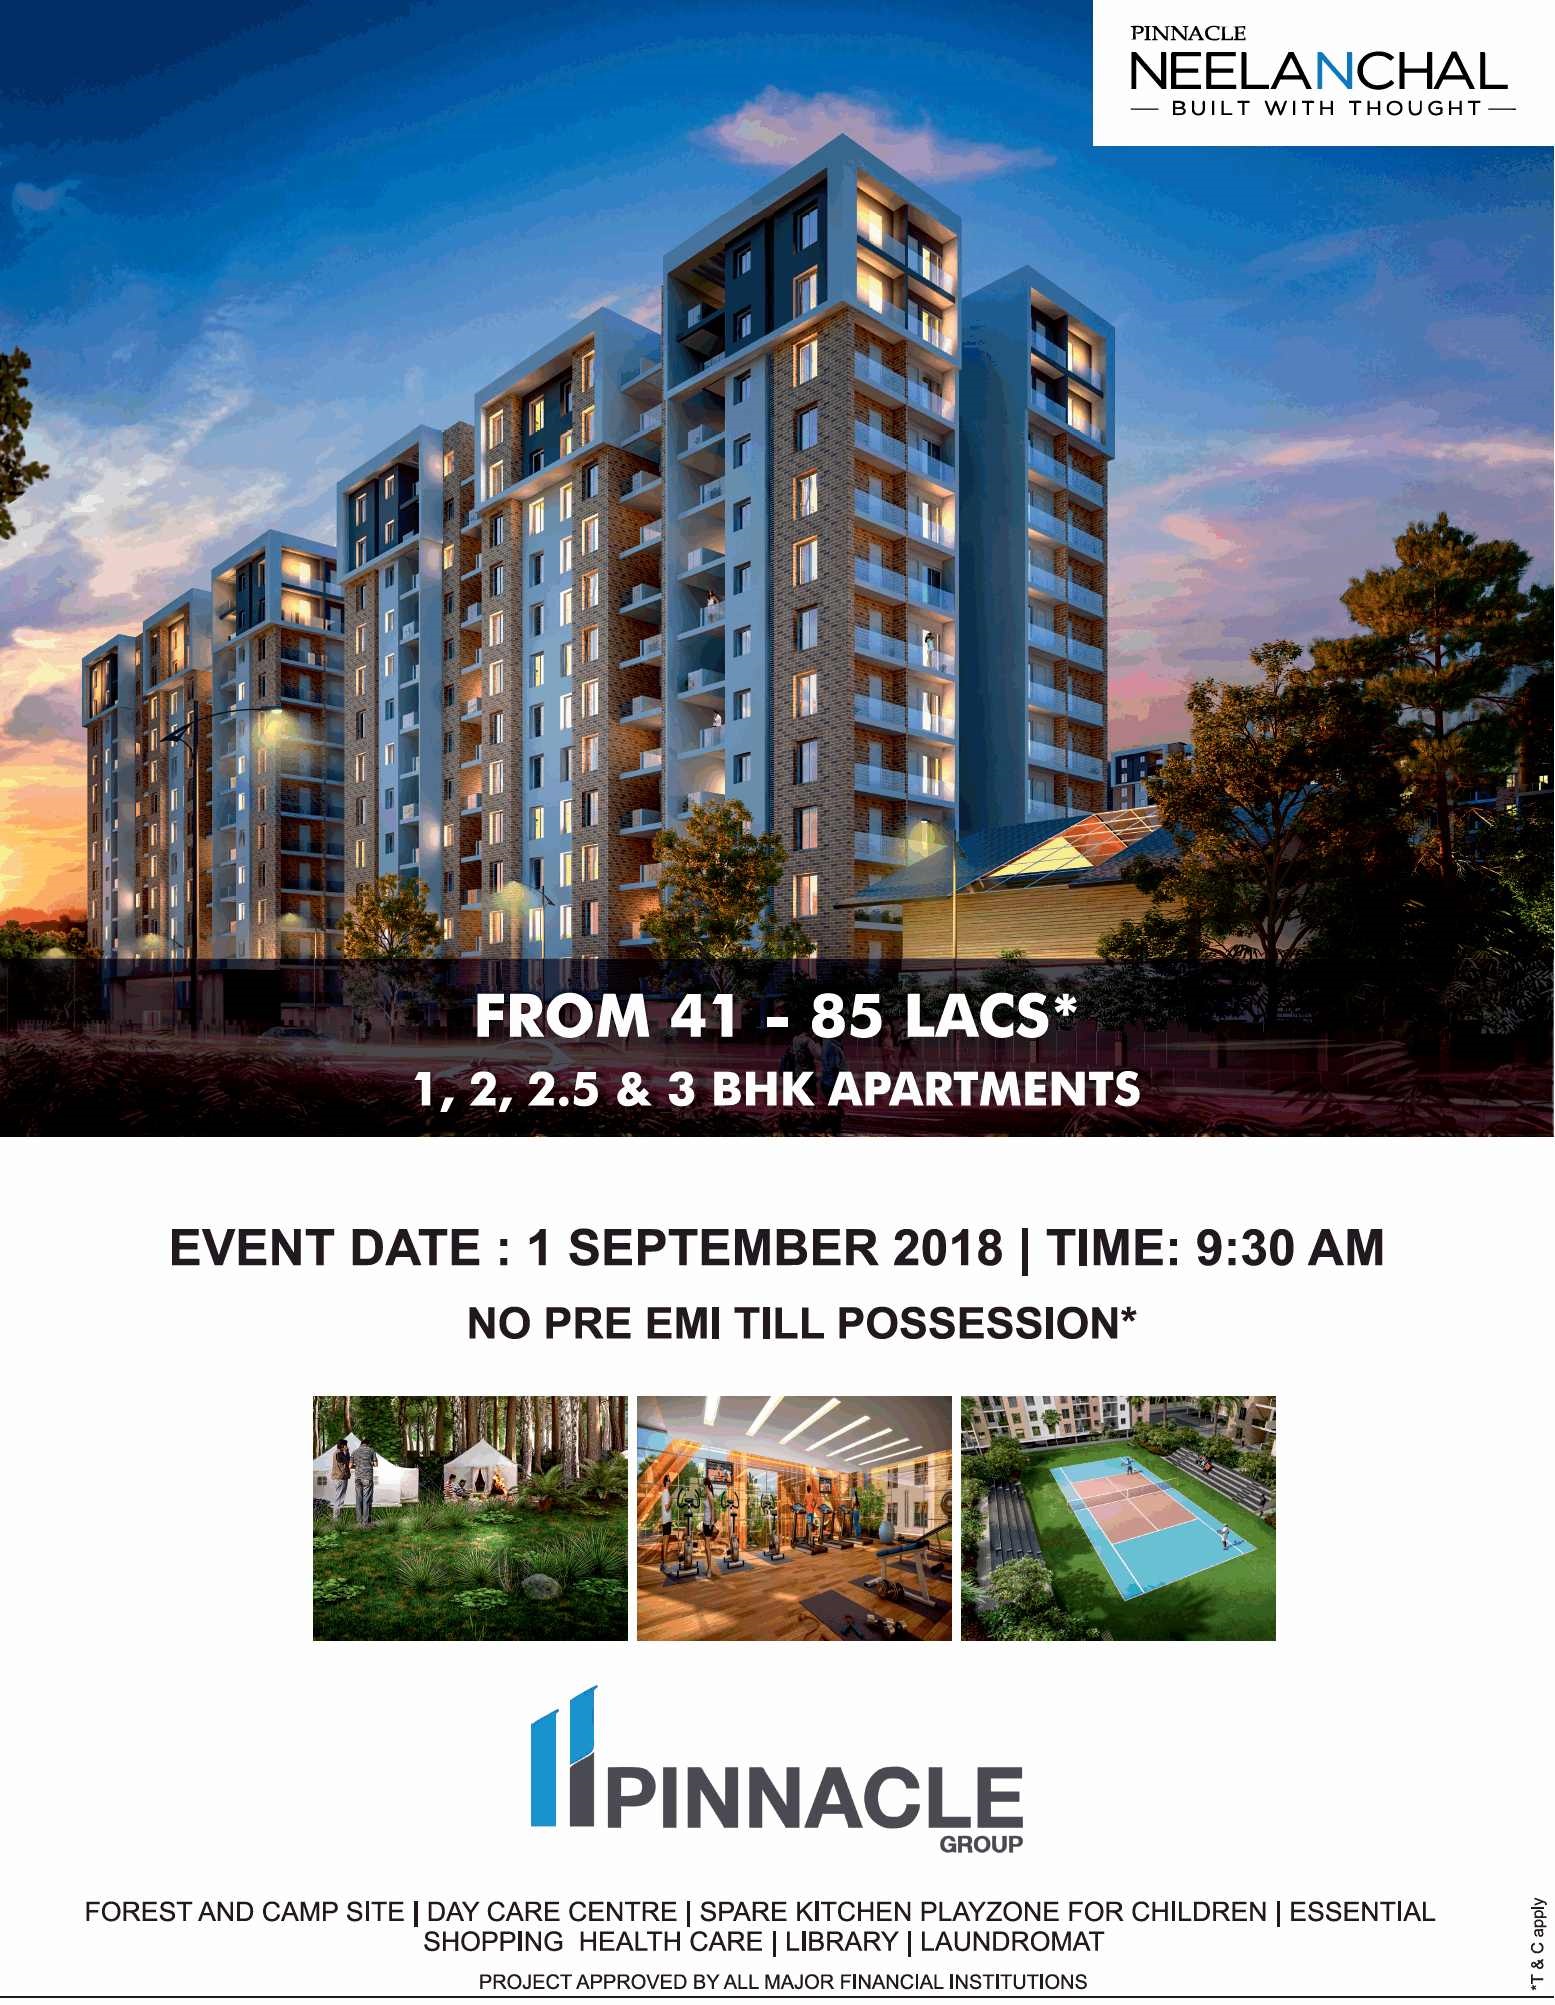 Pay no pre EMI till possession at Pinnacle Neelanchal in Pune Update